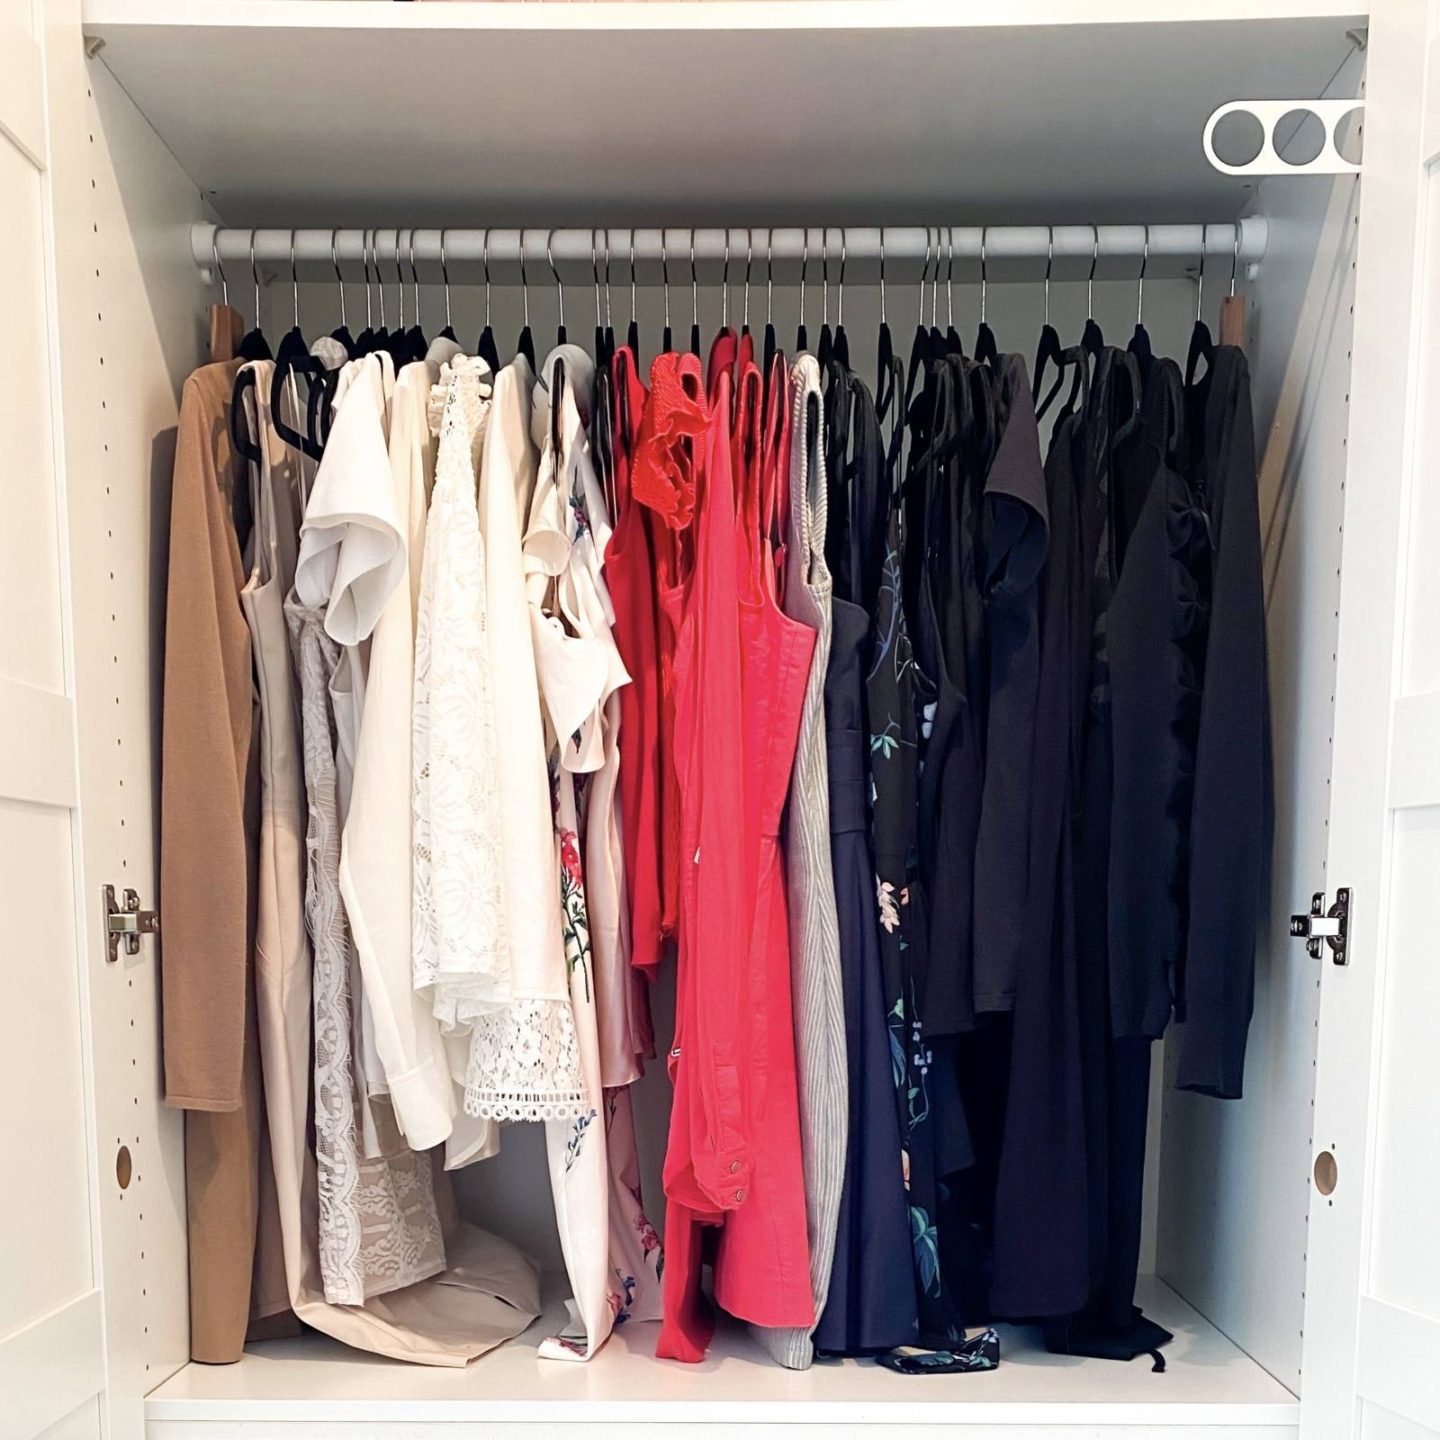 https://kimbedene.com/wp-content/uploads/2019/11/How-to-organise-your-closet-like-a-minimalist-color-coordinated-capsule-wardrobe-after-1440x1440.jpeg